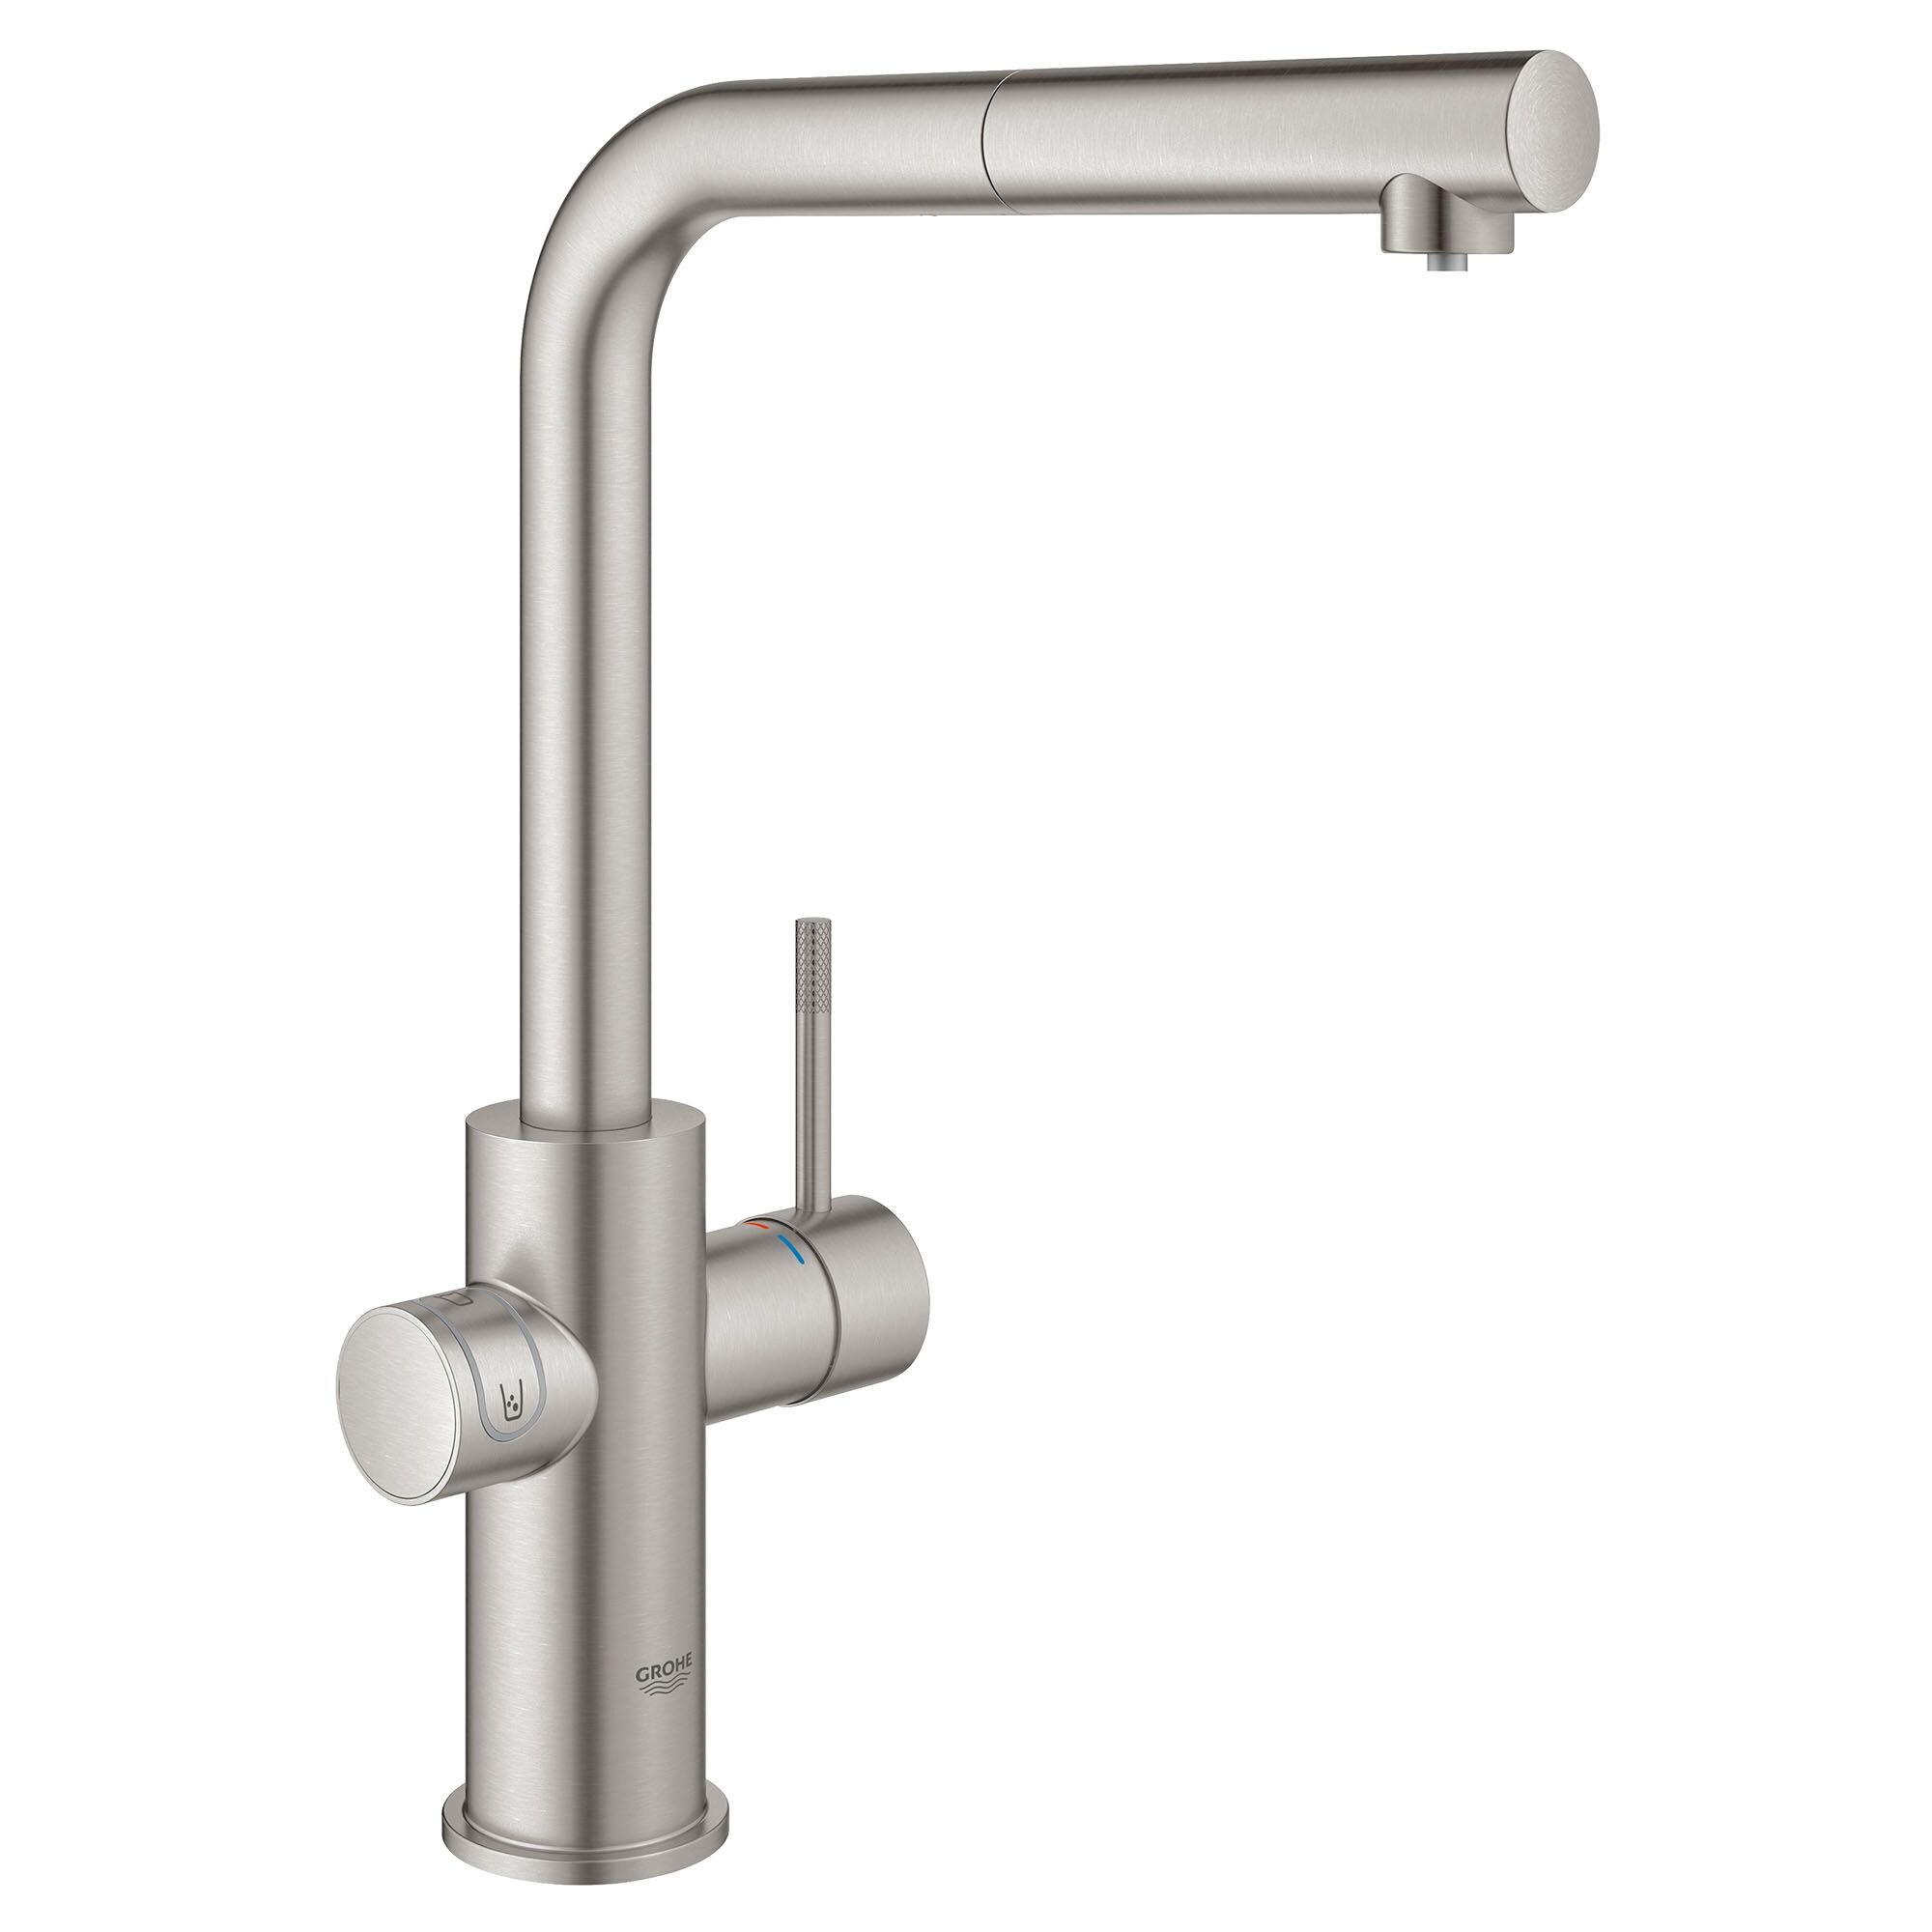 verband Tektonisch Optimaal GROHE Supersteel Single Handle Pull-out Kitchen Faucet with Sprayer  Function in the Kitchen Faucets department at Lowes.com